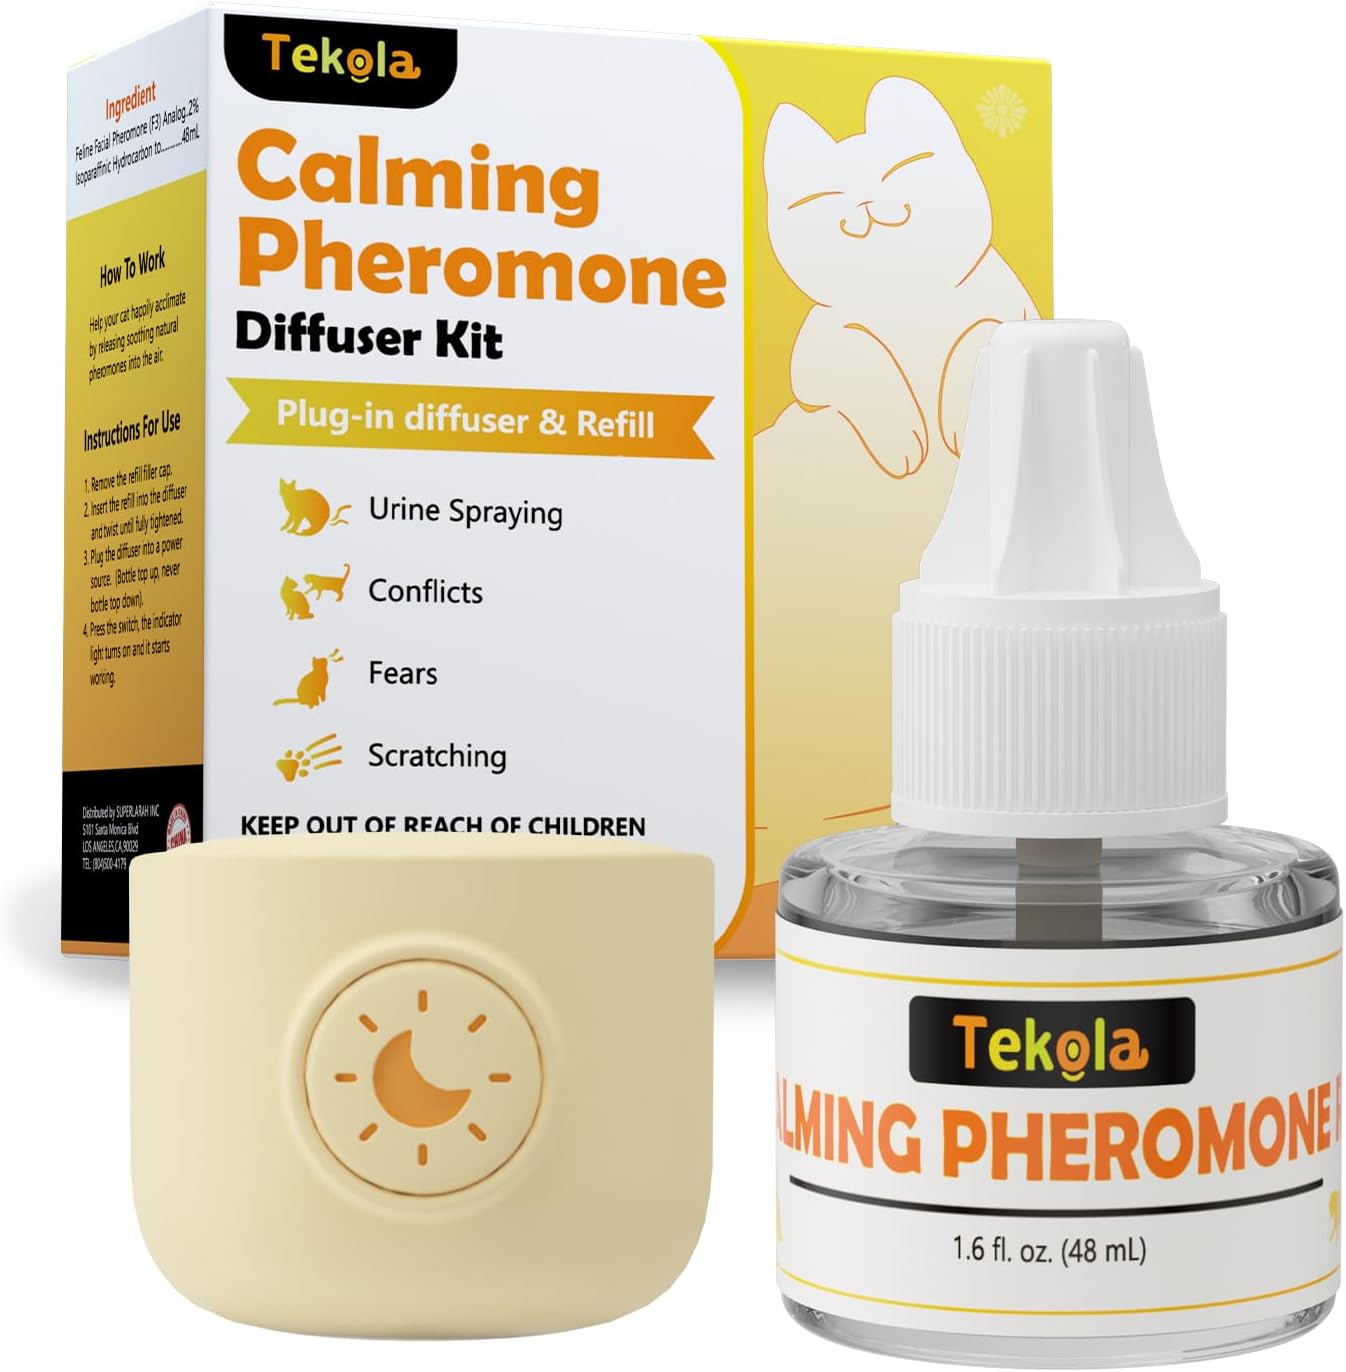 Cat Calming Diffuser Anxiety Relief Cat Pheromones Calming Diffuser 2-in-1 30 Days Refill Cat Pheromone Diffuser to Reduce Cat Fighting, Spraying & Scratching 48ml (1.6 l.oz.)